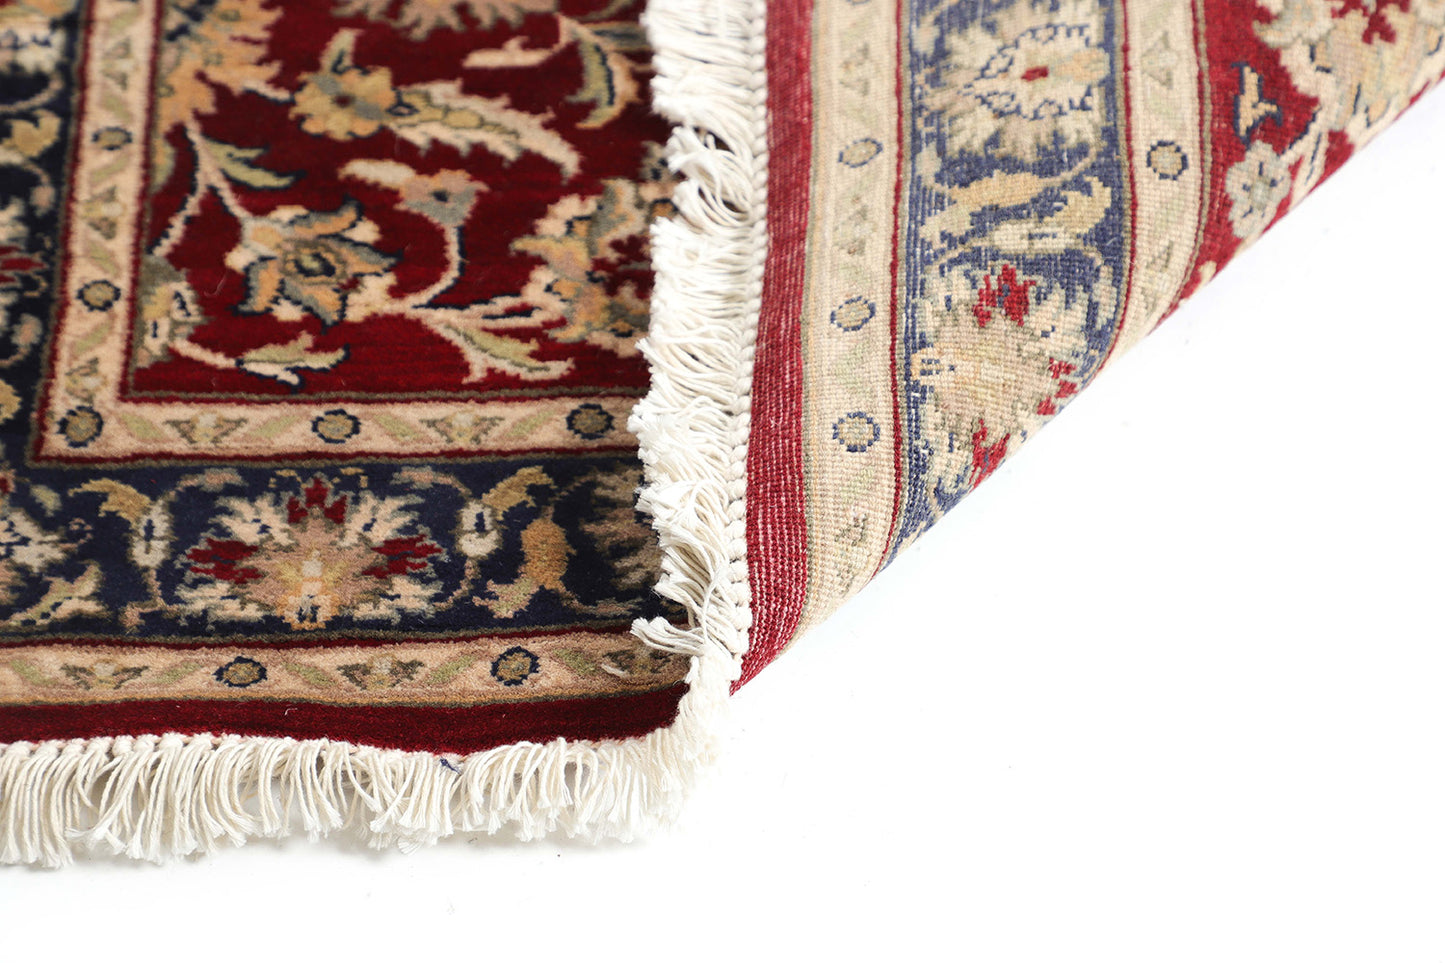 Hand-Knotted Lahore Carpet 2'.6" X 20' Oriental, Red Fine Wool Runner Rug 2.5x20